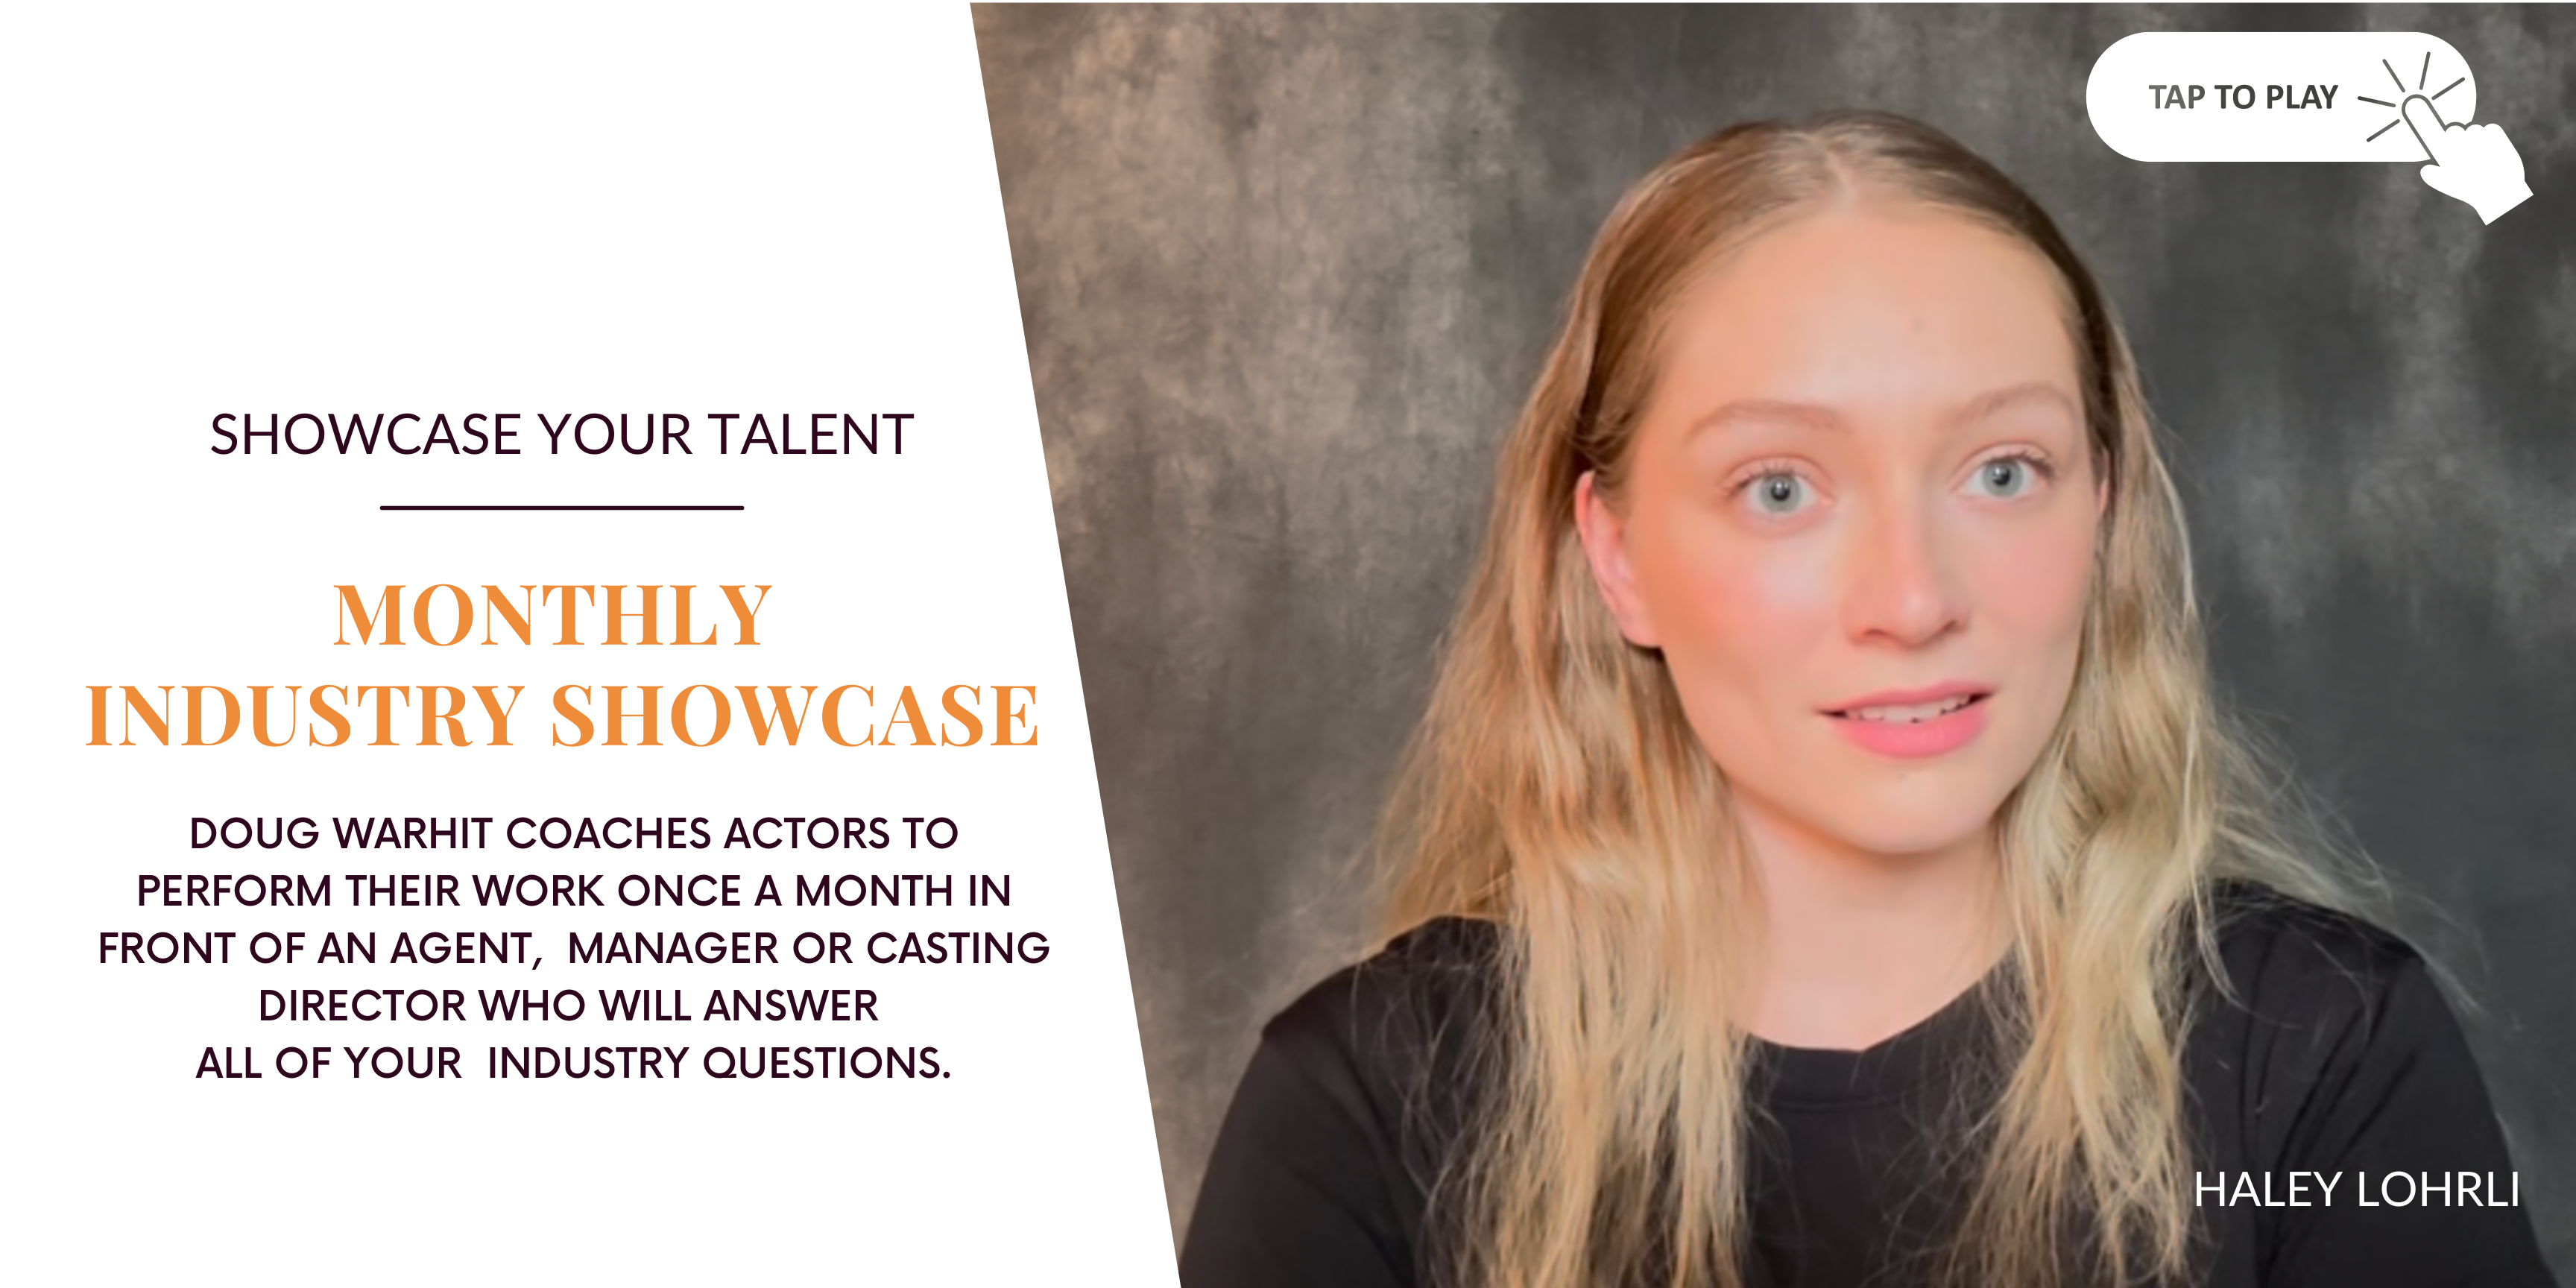 Showcase your acting talent monthly industry acting showcase. Doug Warhit coaches actors to perform their work once a month in front of an agent, manager or casting director who will answer all of your industry questions